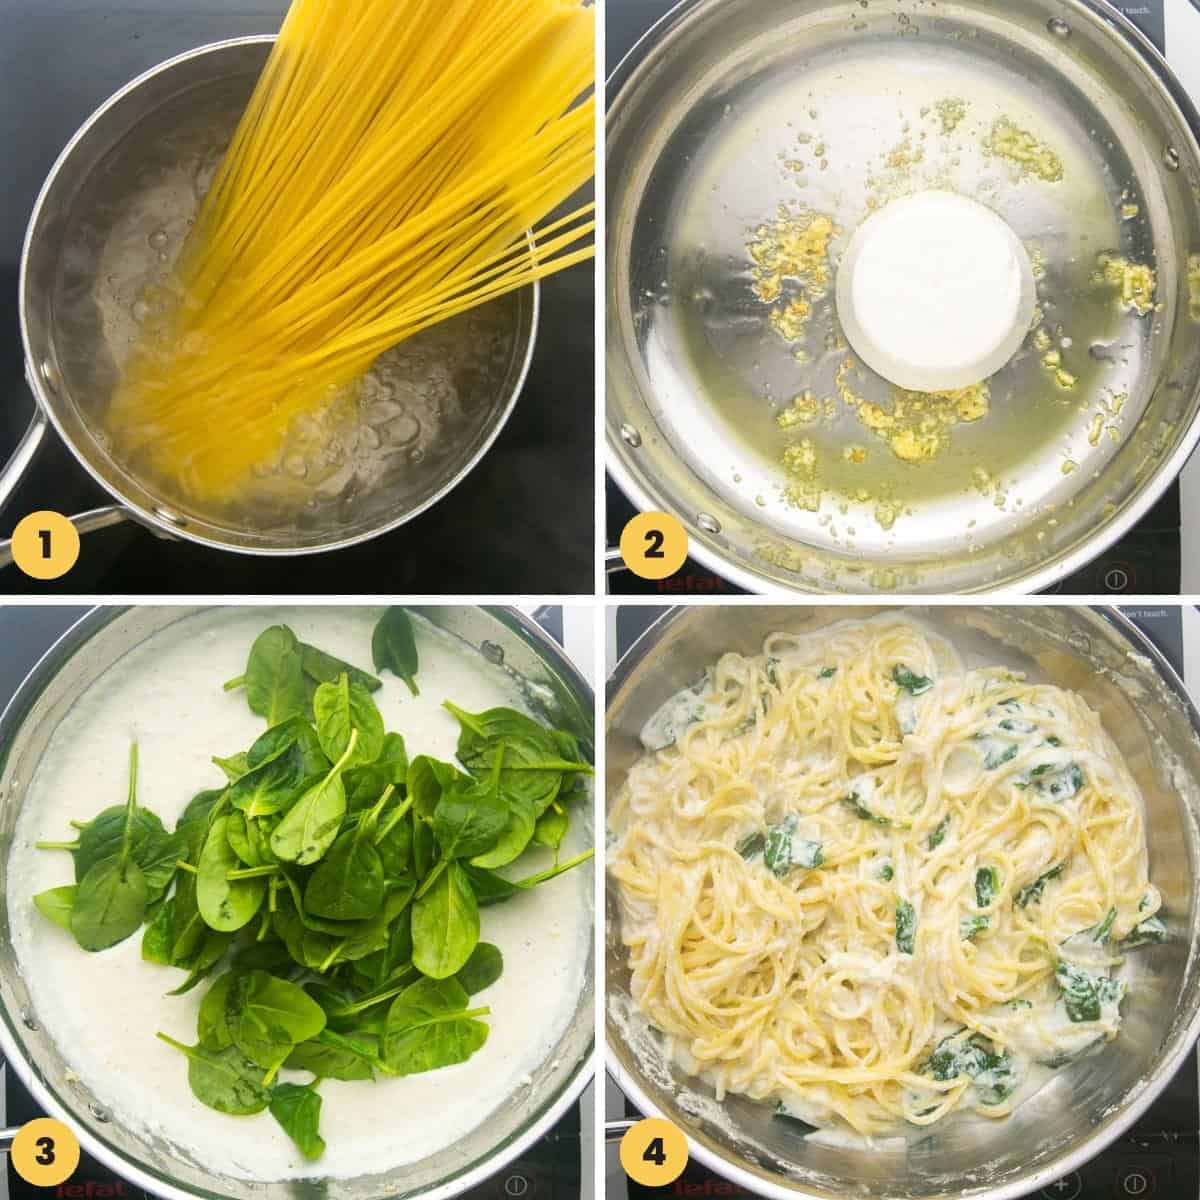 a collage of 4 images showing how to make lemon ricotta pasta with spaghetti and spinach.